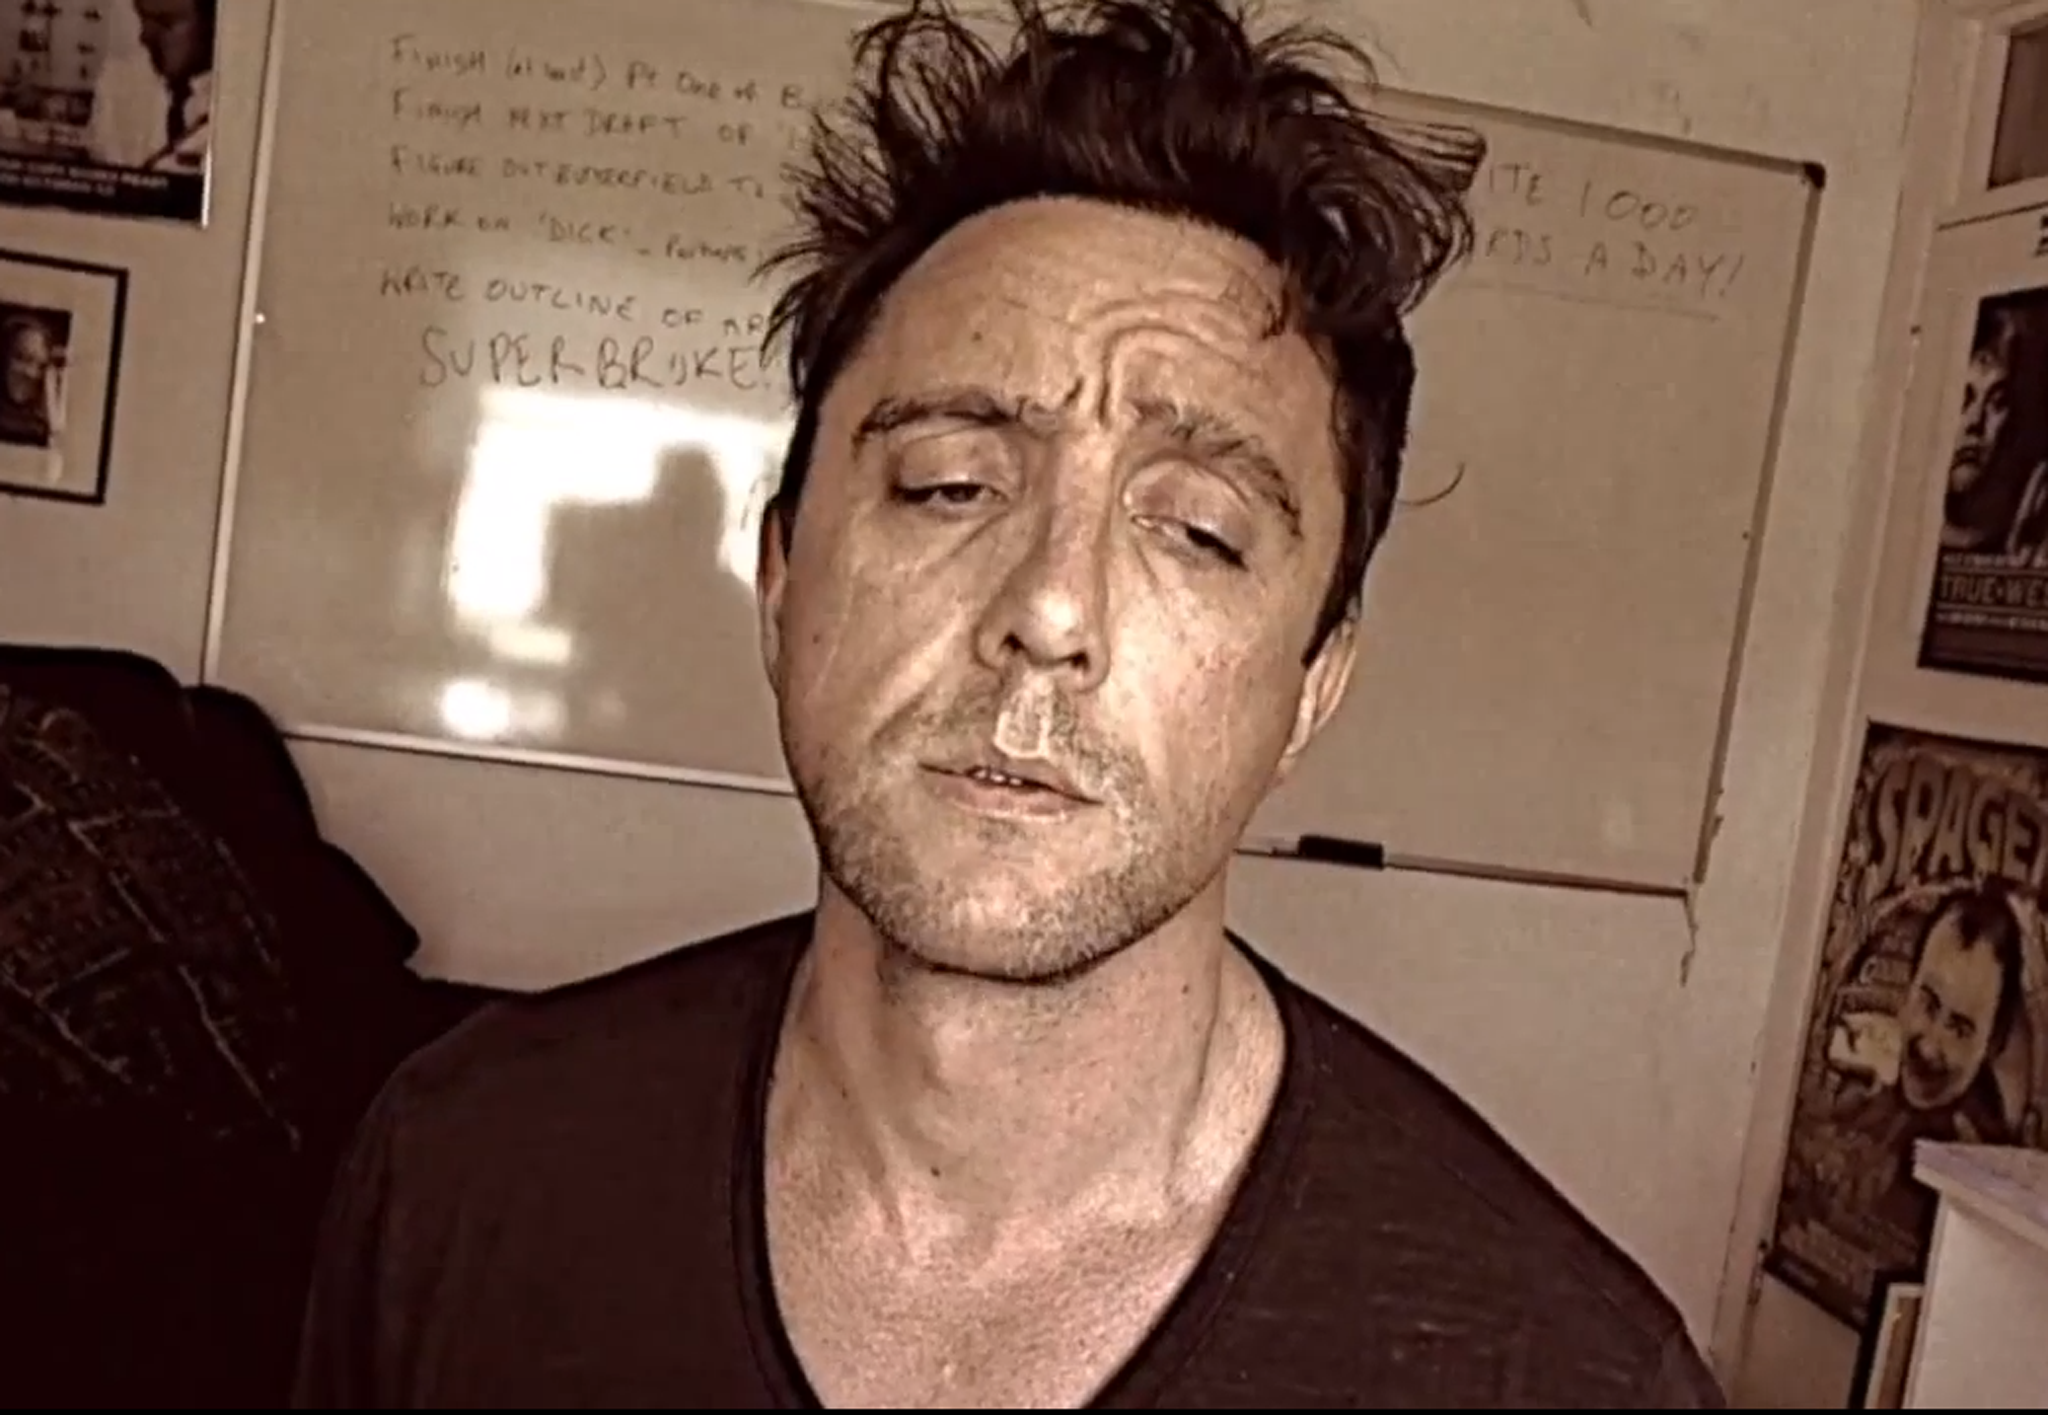 Peter Serafinowicz sings the first page of Morrissey's autobiography